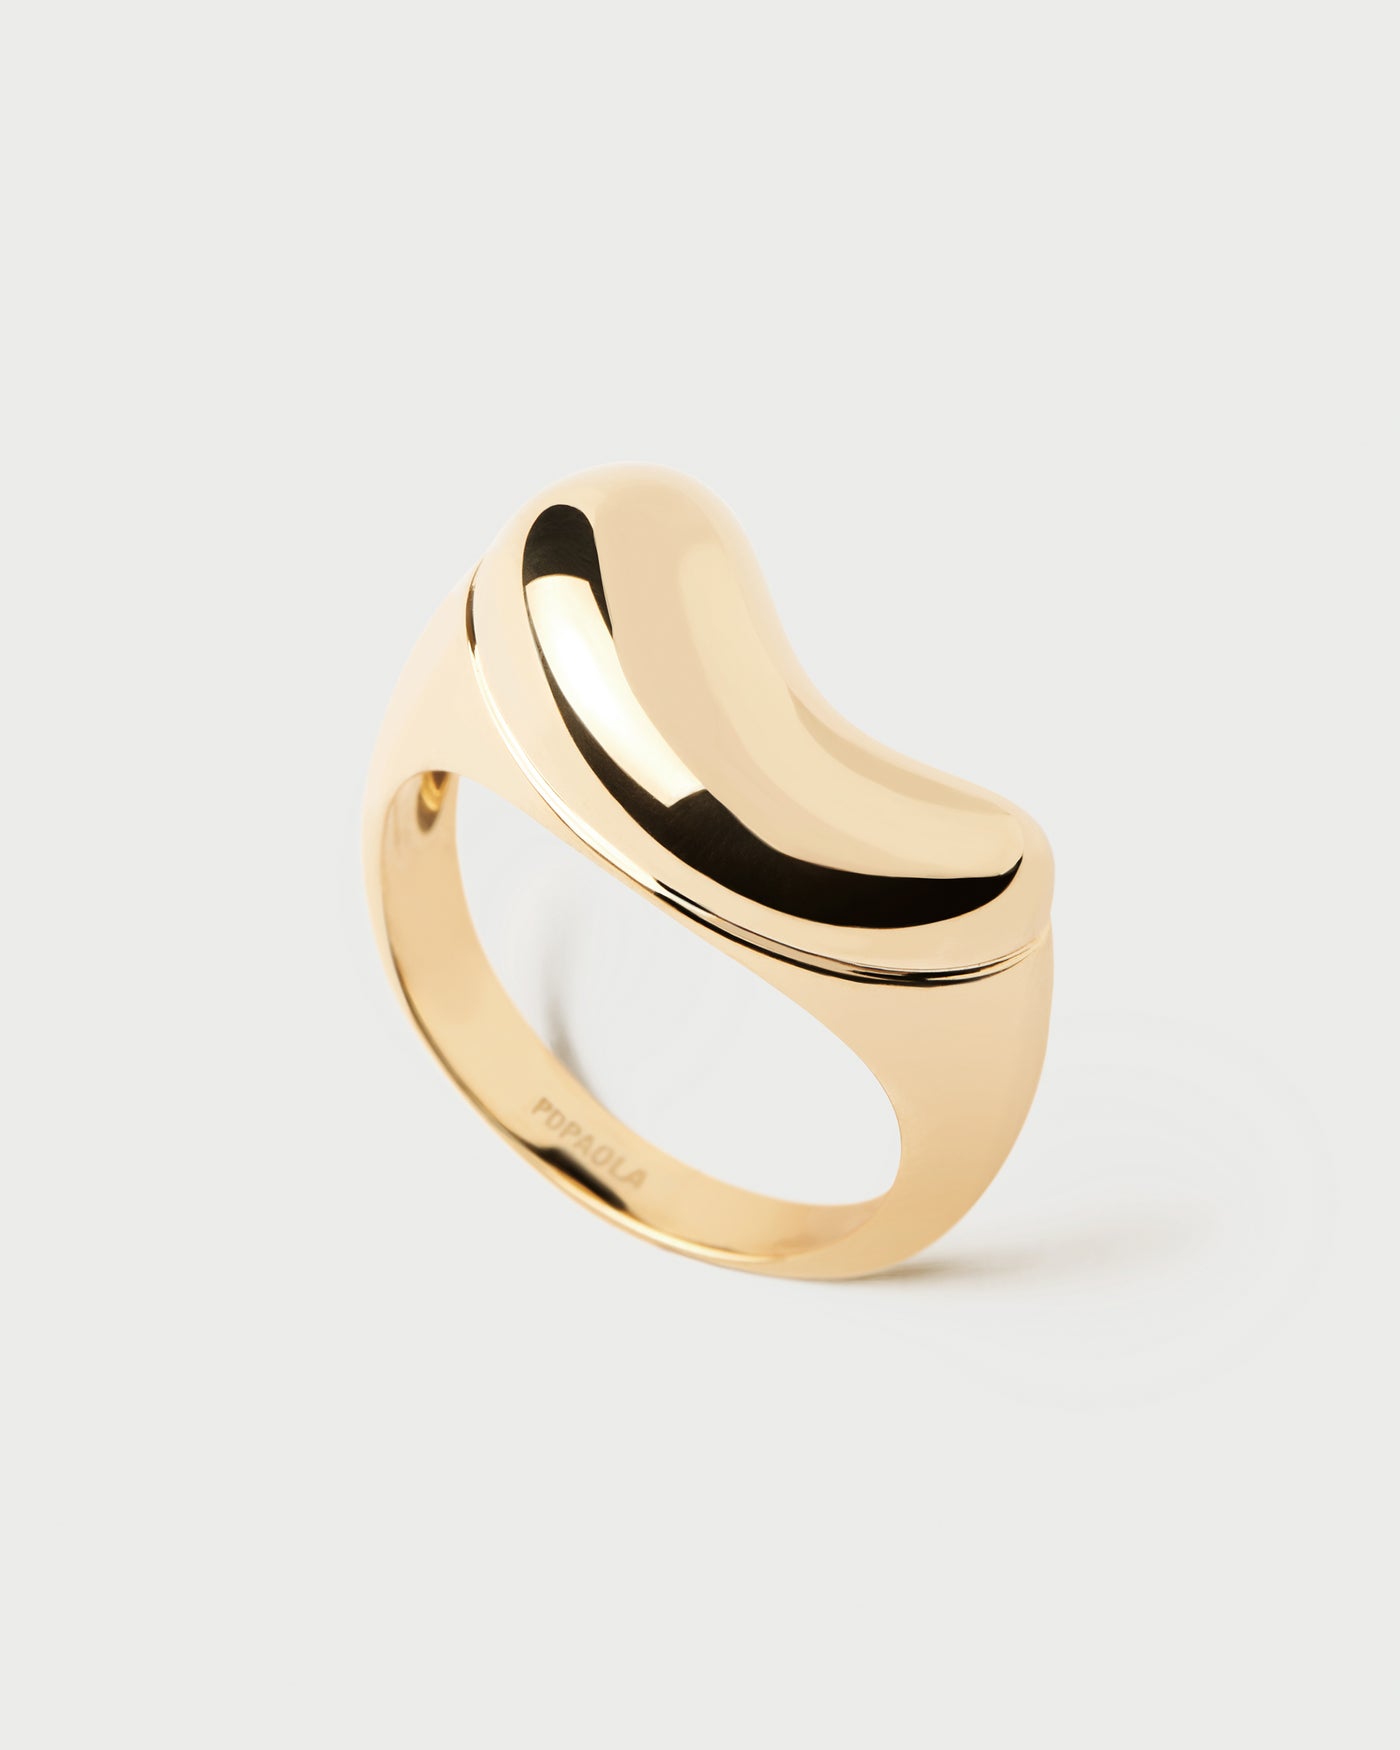 Aqua ring. Gold-plated chunky signet ring with a wavy bean shape. Get the latest arrival from PDPAOLA. Place your order safely and get this Best Seller.